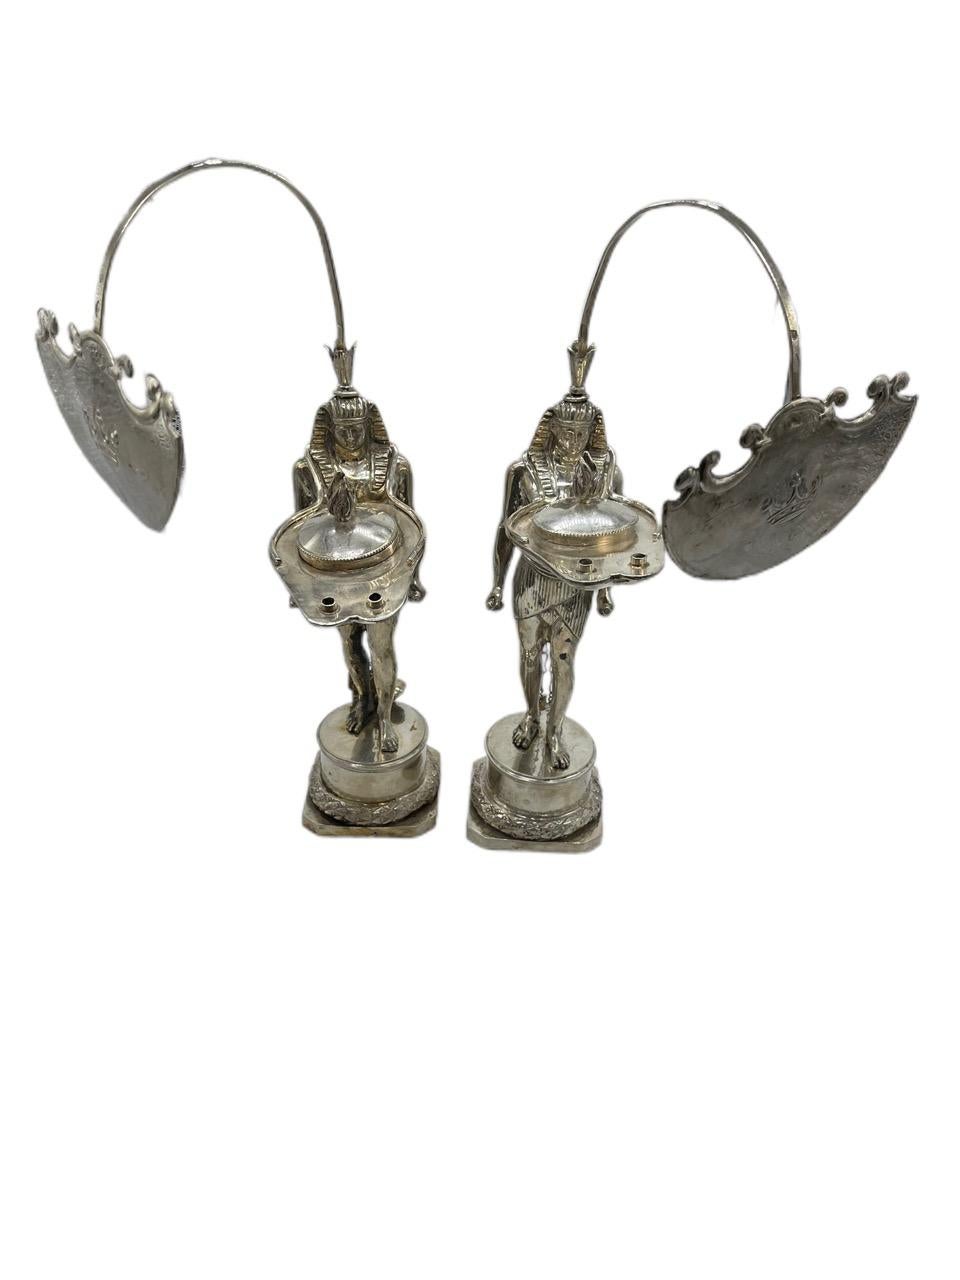 Pair of Early 19th Century Italian Antique Silver Oil Lamps by Vincenzo Belli II 7